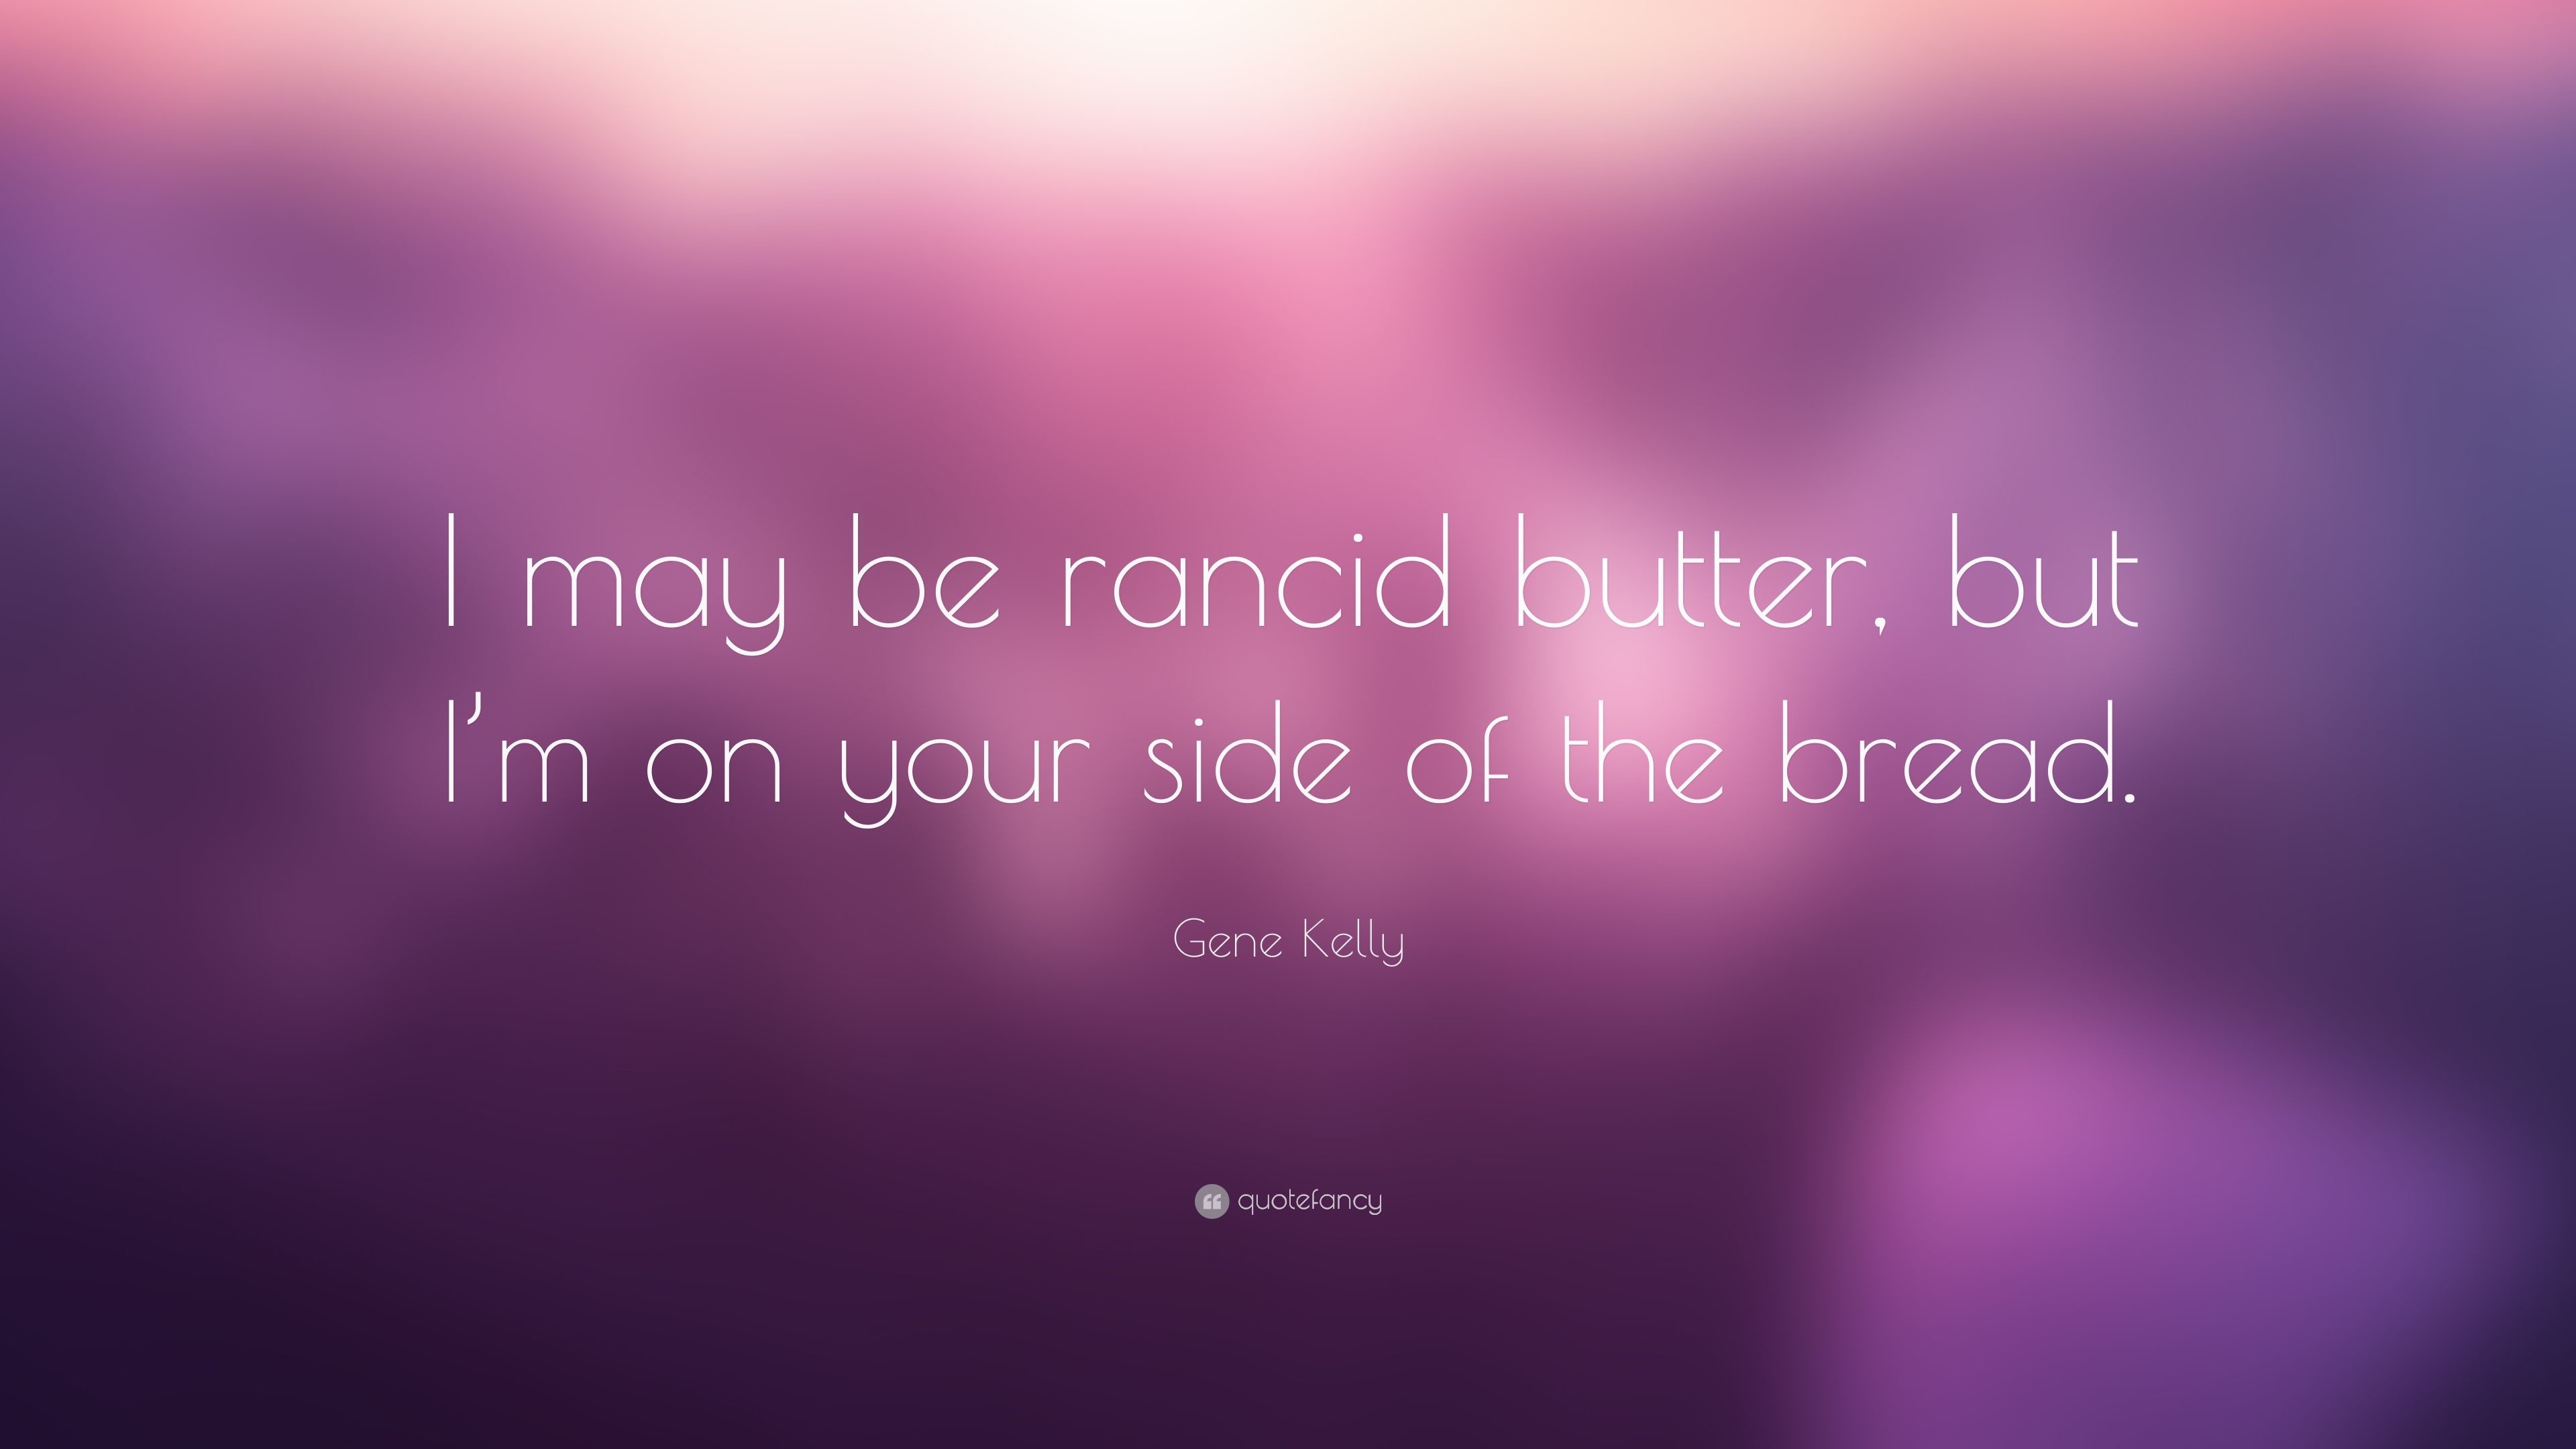 3840x2160 Gene Kelly Quote: “I may be rancid butter, but I'm on